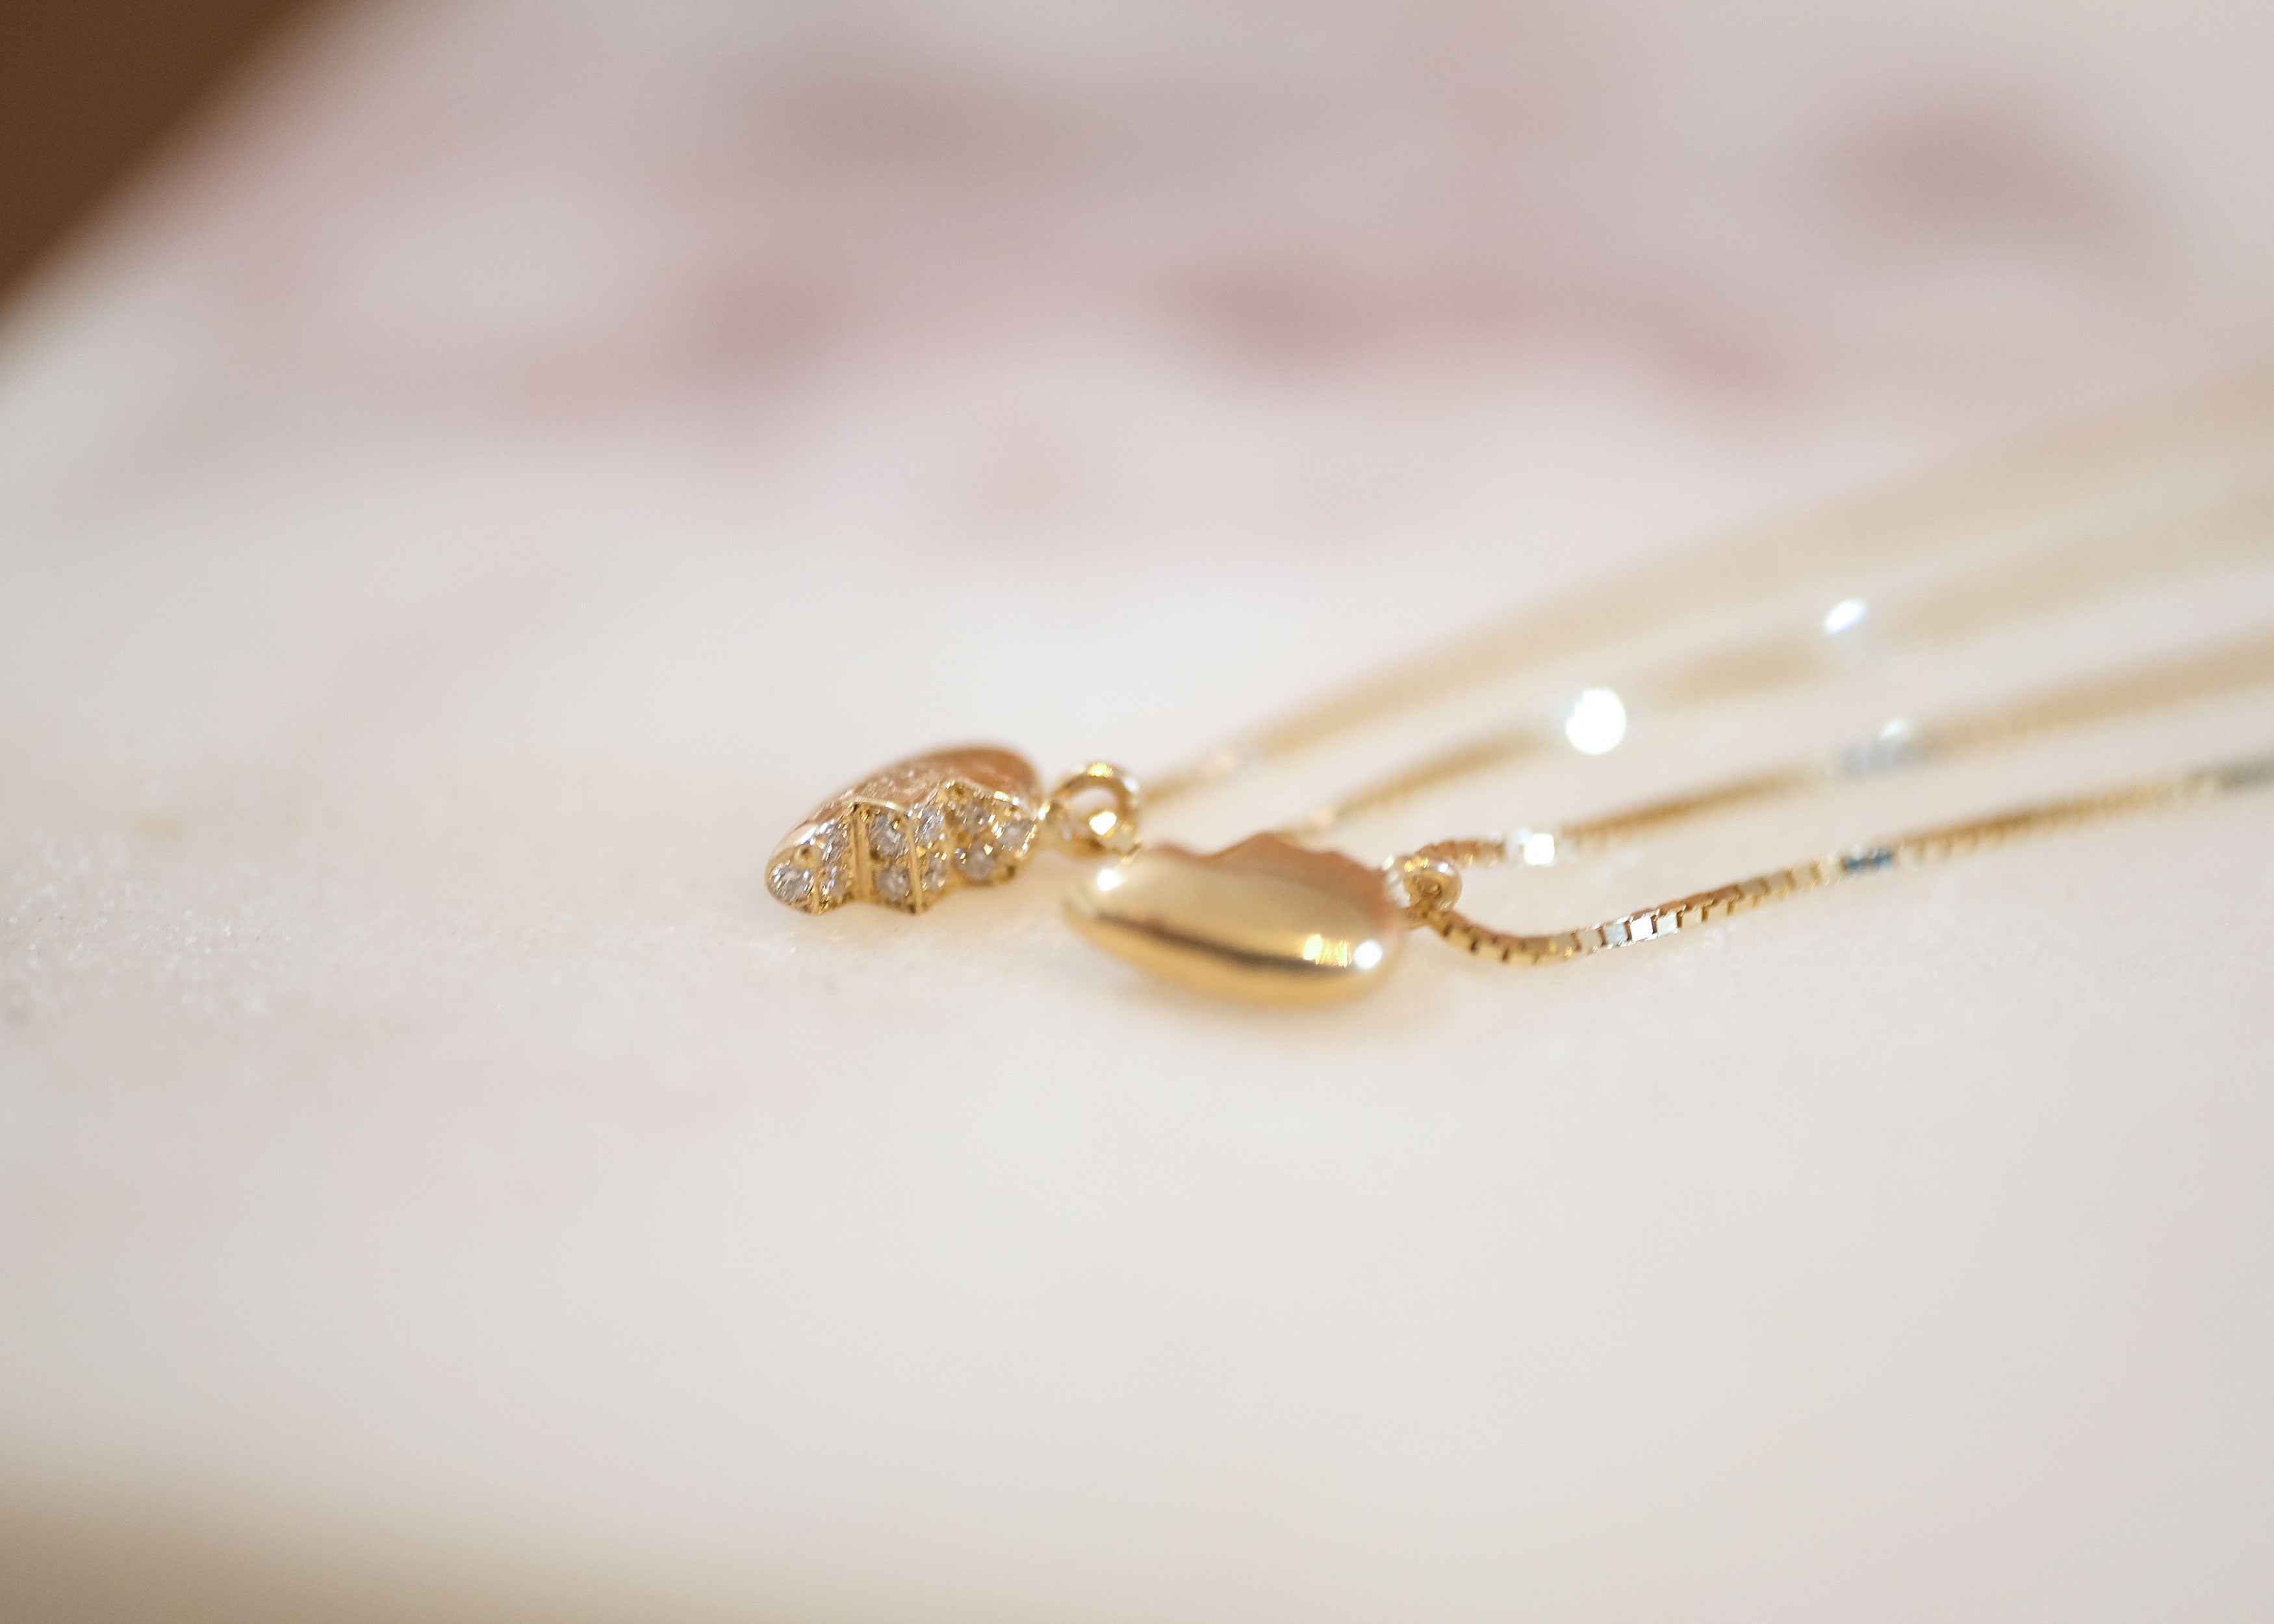 Christmas 2022: Top Jewelry Gifts for Your Best Friend | With Clarity